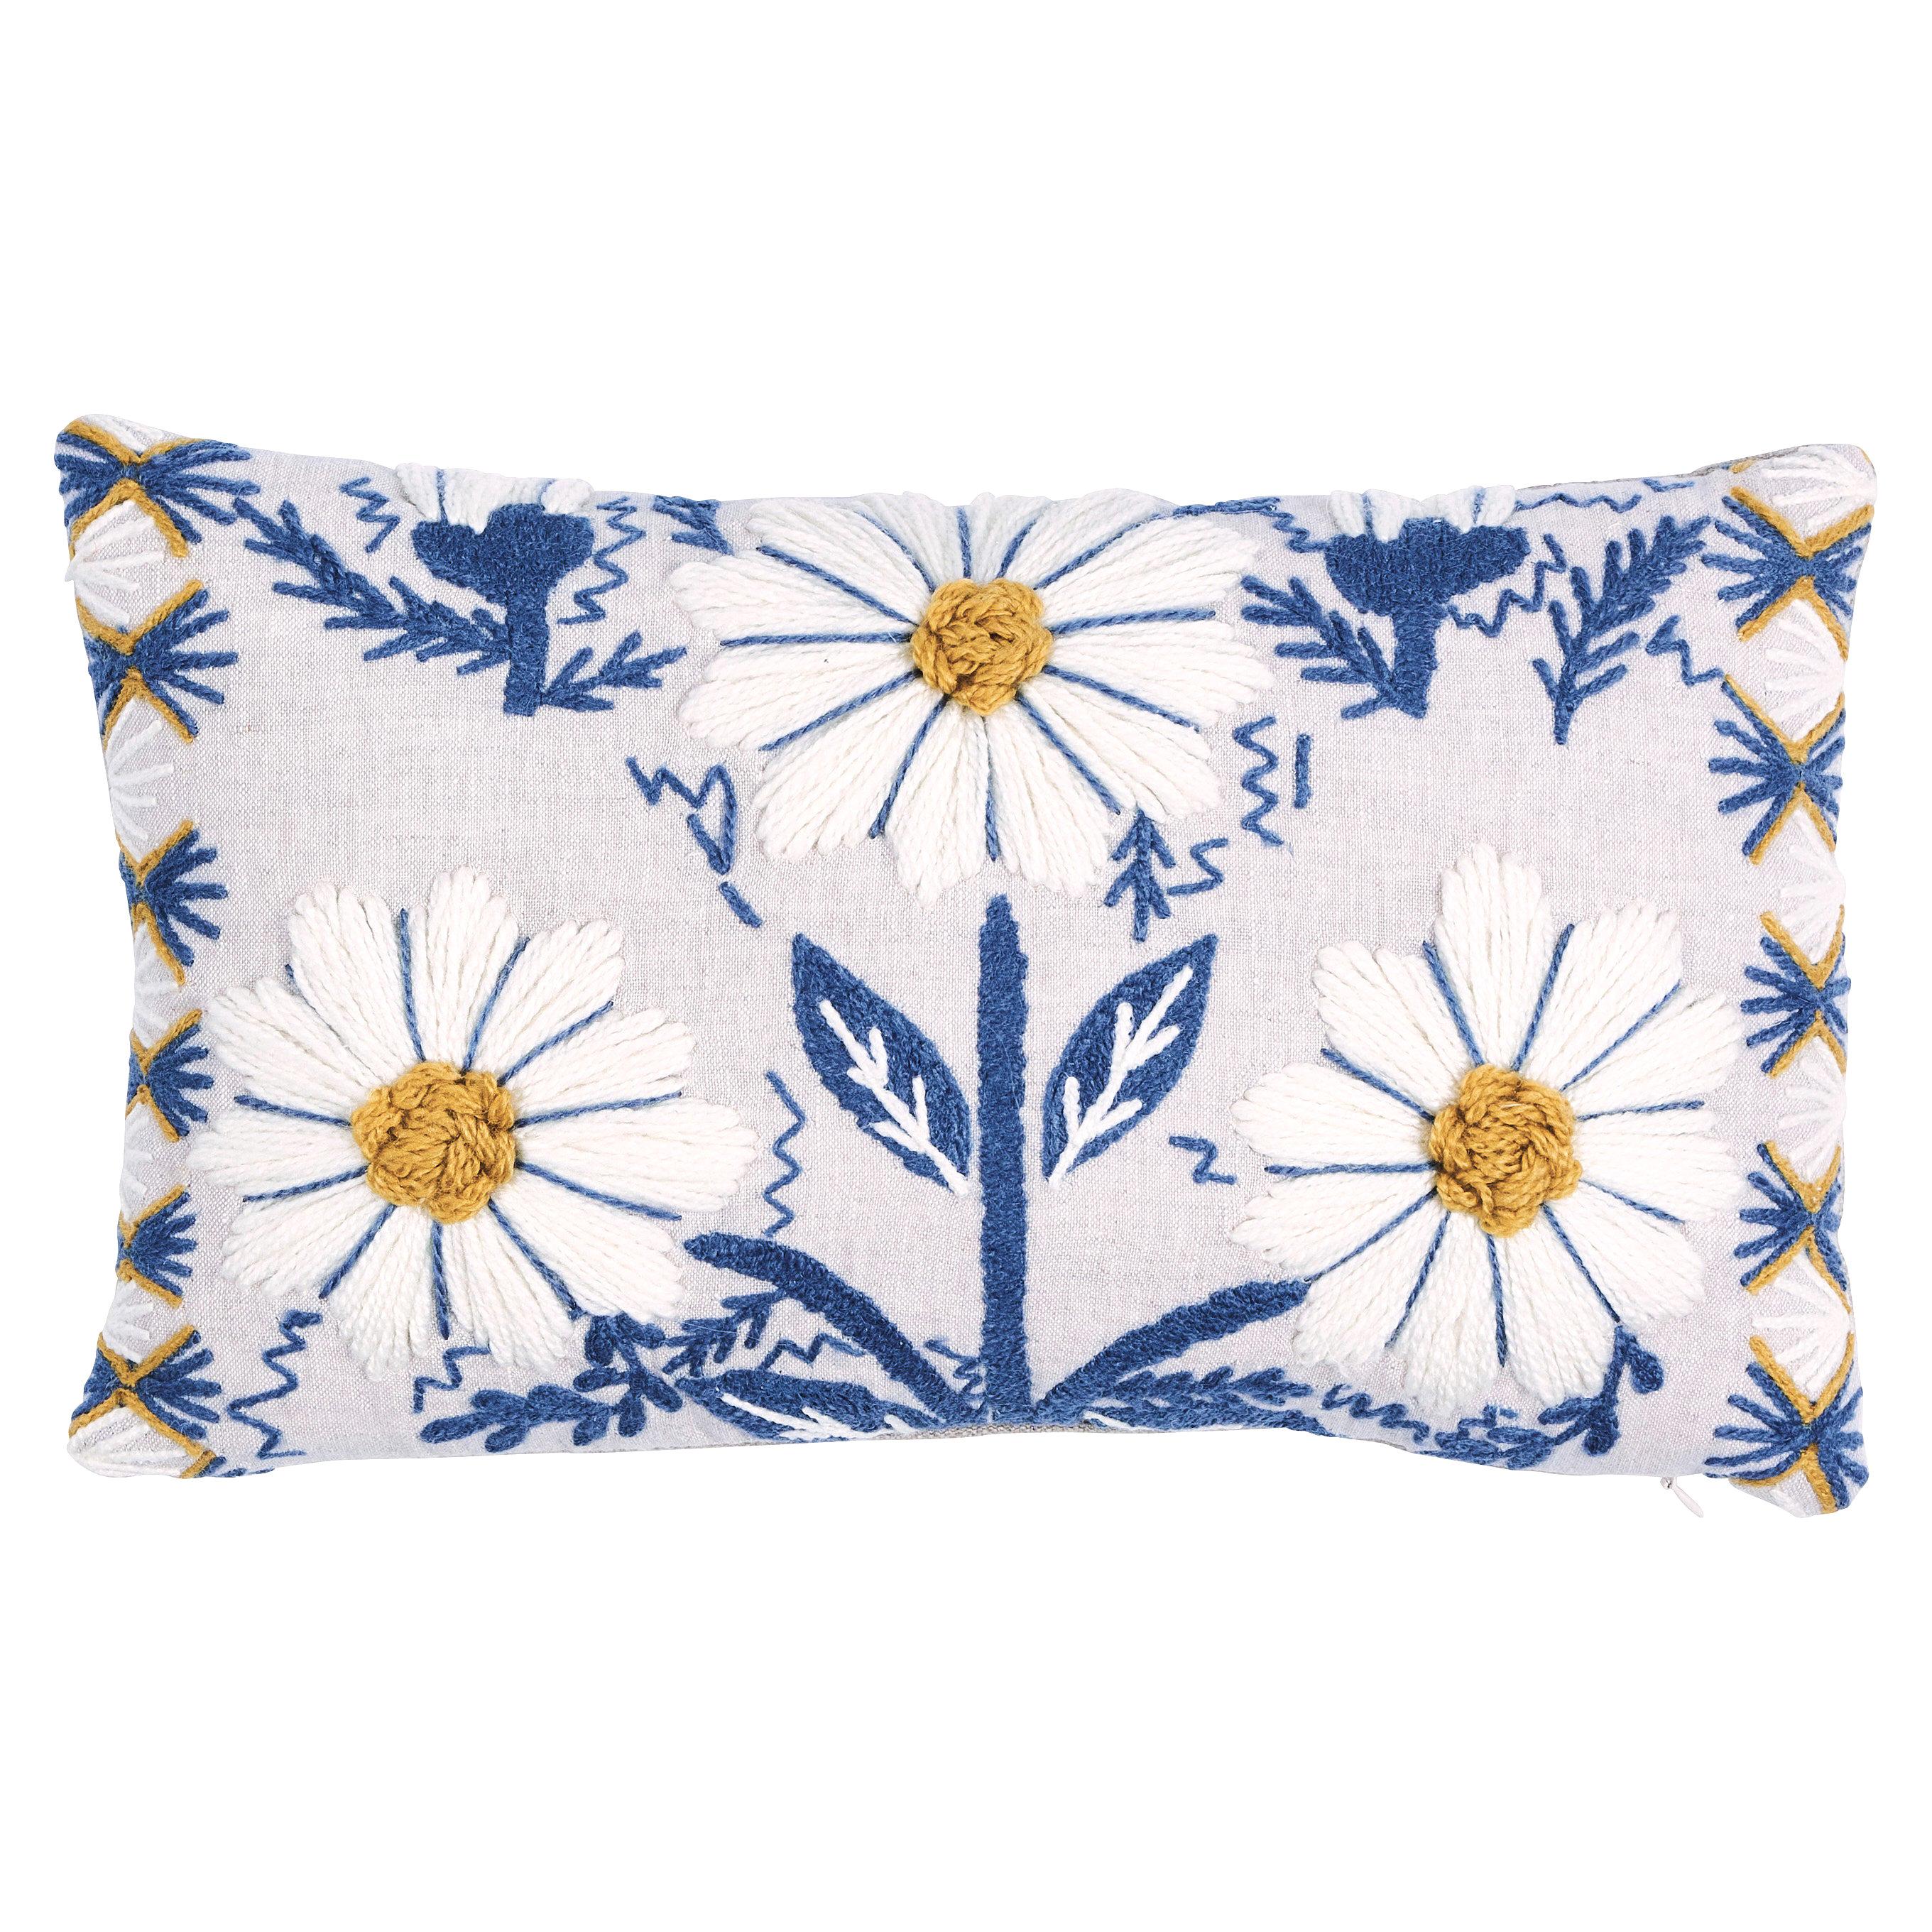 Schumacher Marguerite Embroidery Pillow in Blue & Ochre For Sale